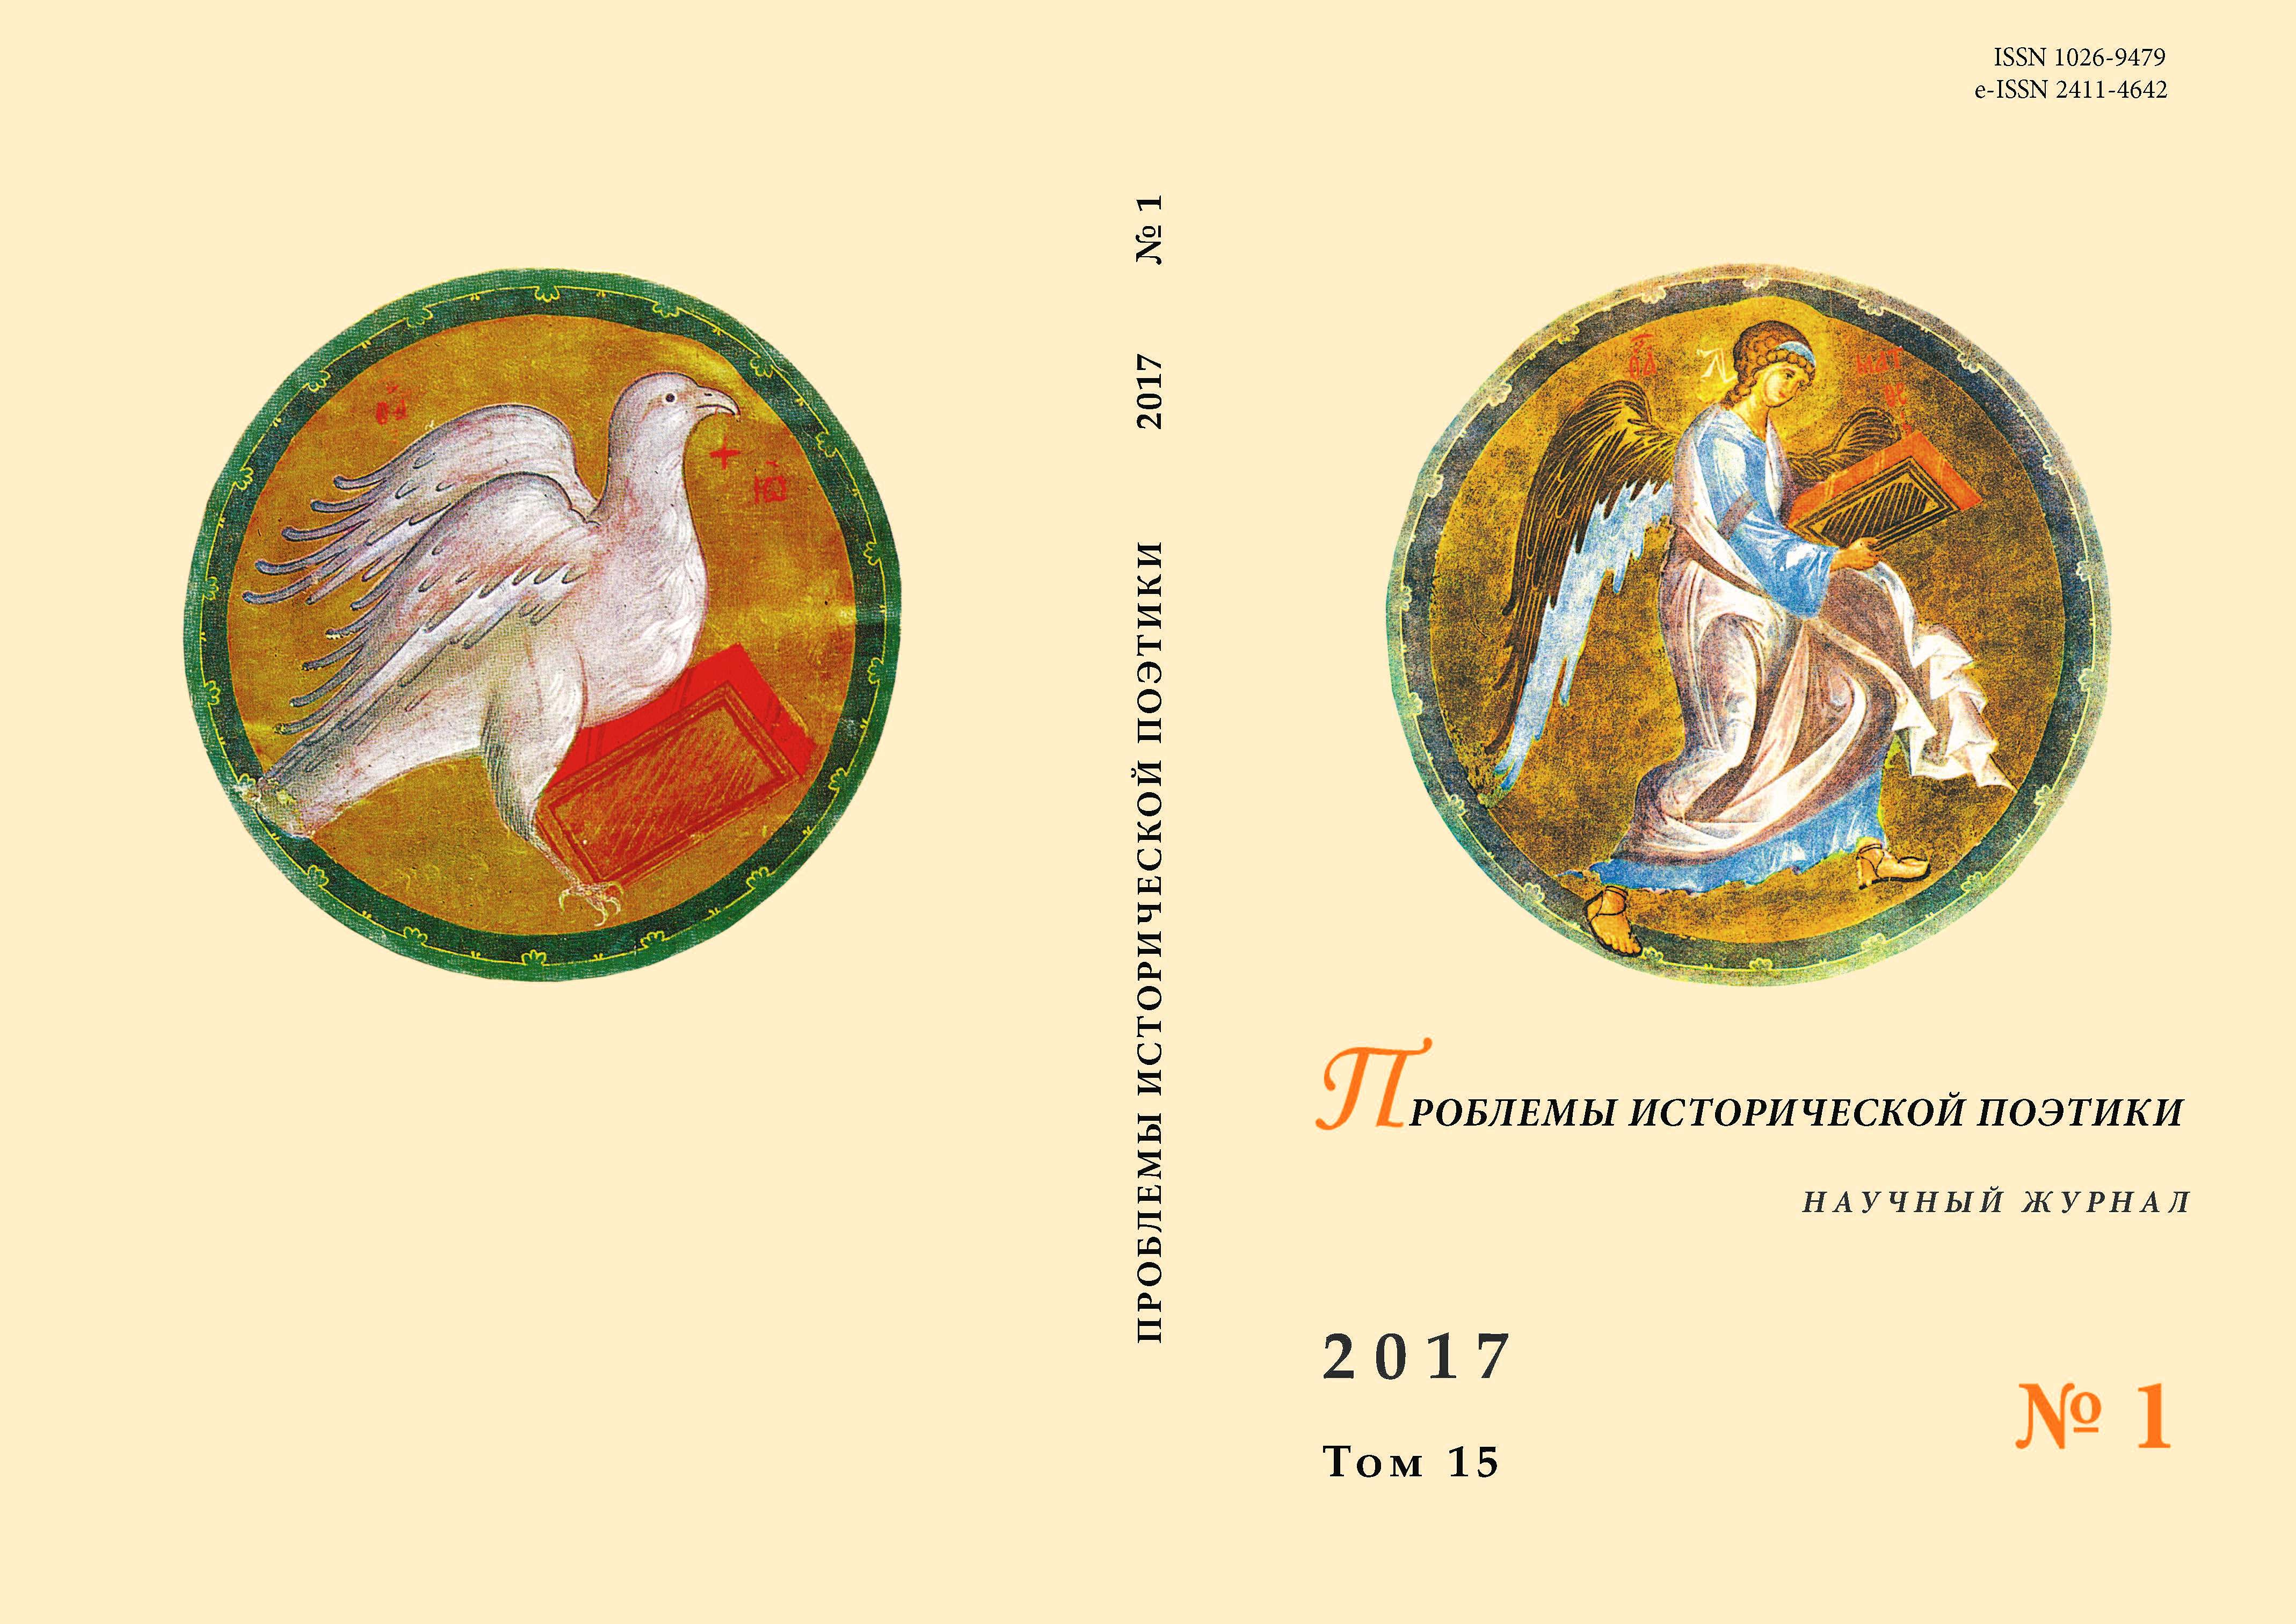 THE THIRD GREAT QUESTION IN RUSSIAN LITERATURE: “WHAT MEN LIVE BY” BY L. N. TOLSTOY Cover Image